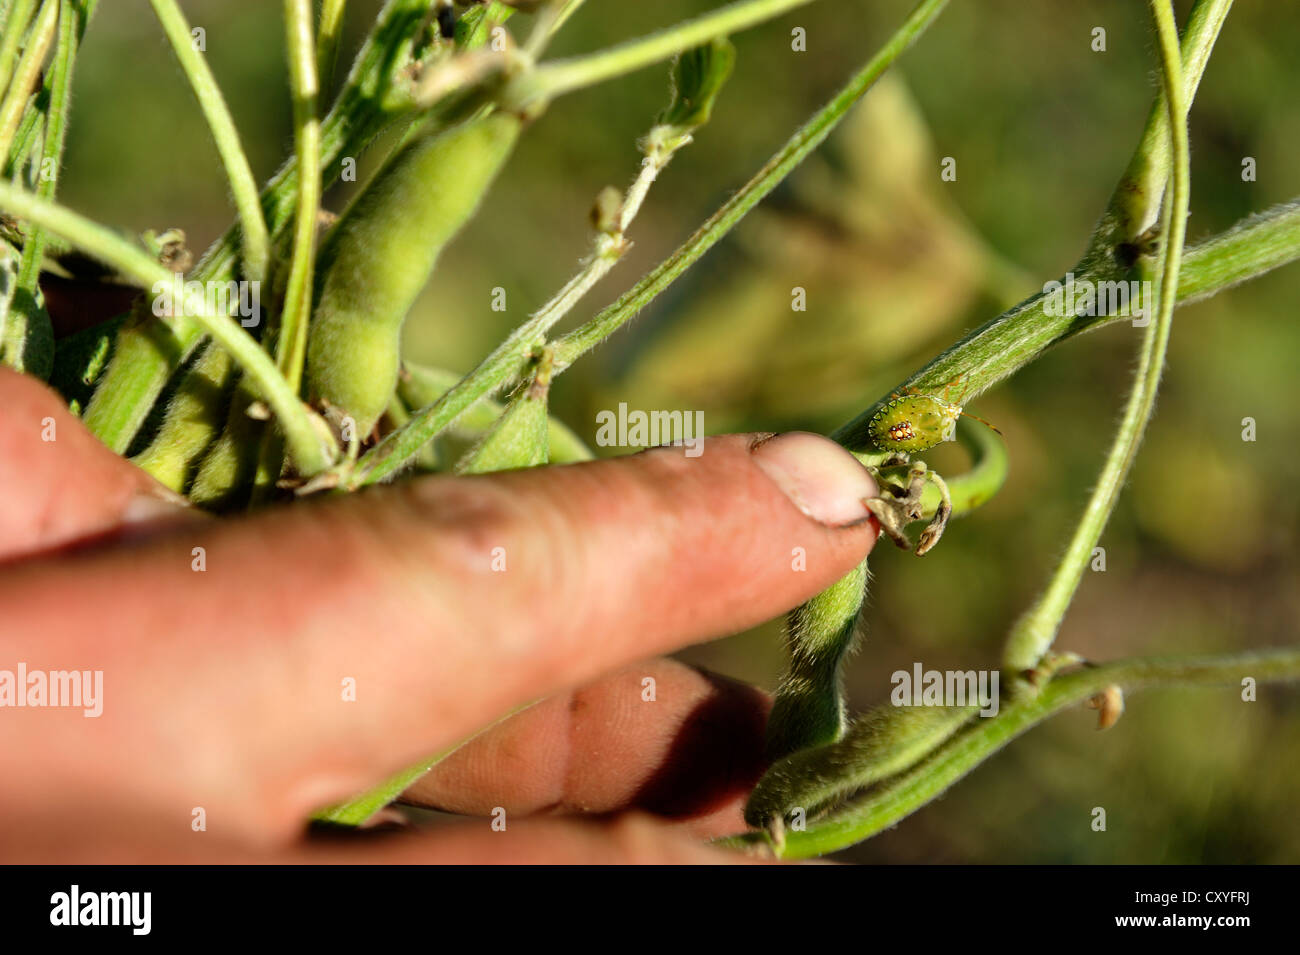 Pest on a soybean plant, pests developing resistance to the pesticide 'Roundup' made by the U.S. agricultural company Monsanto Stock Photo